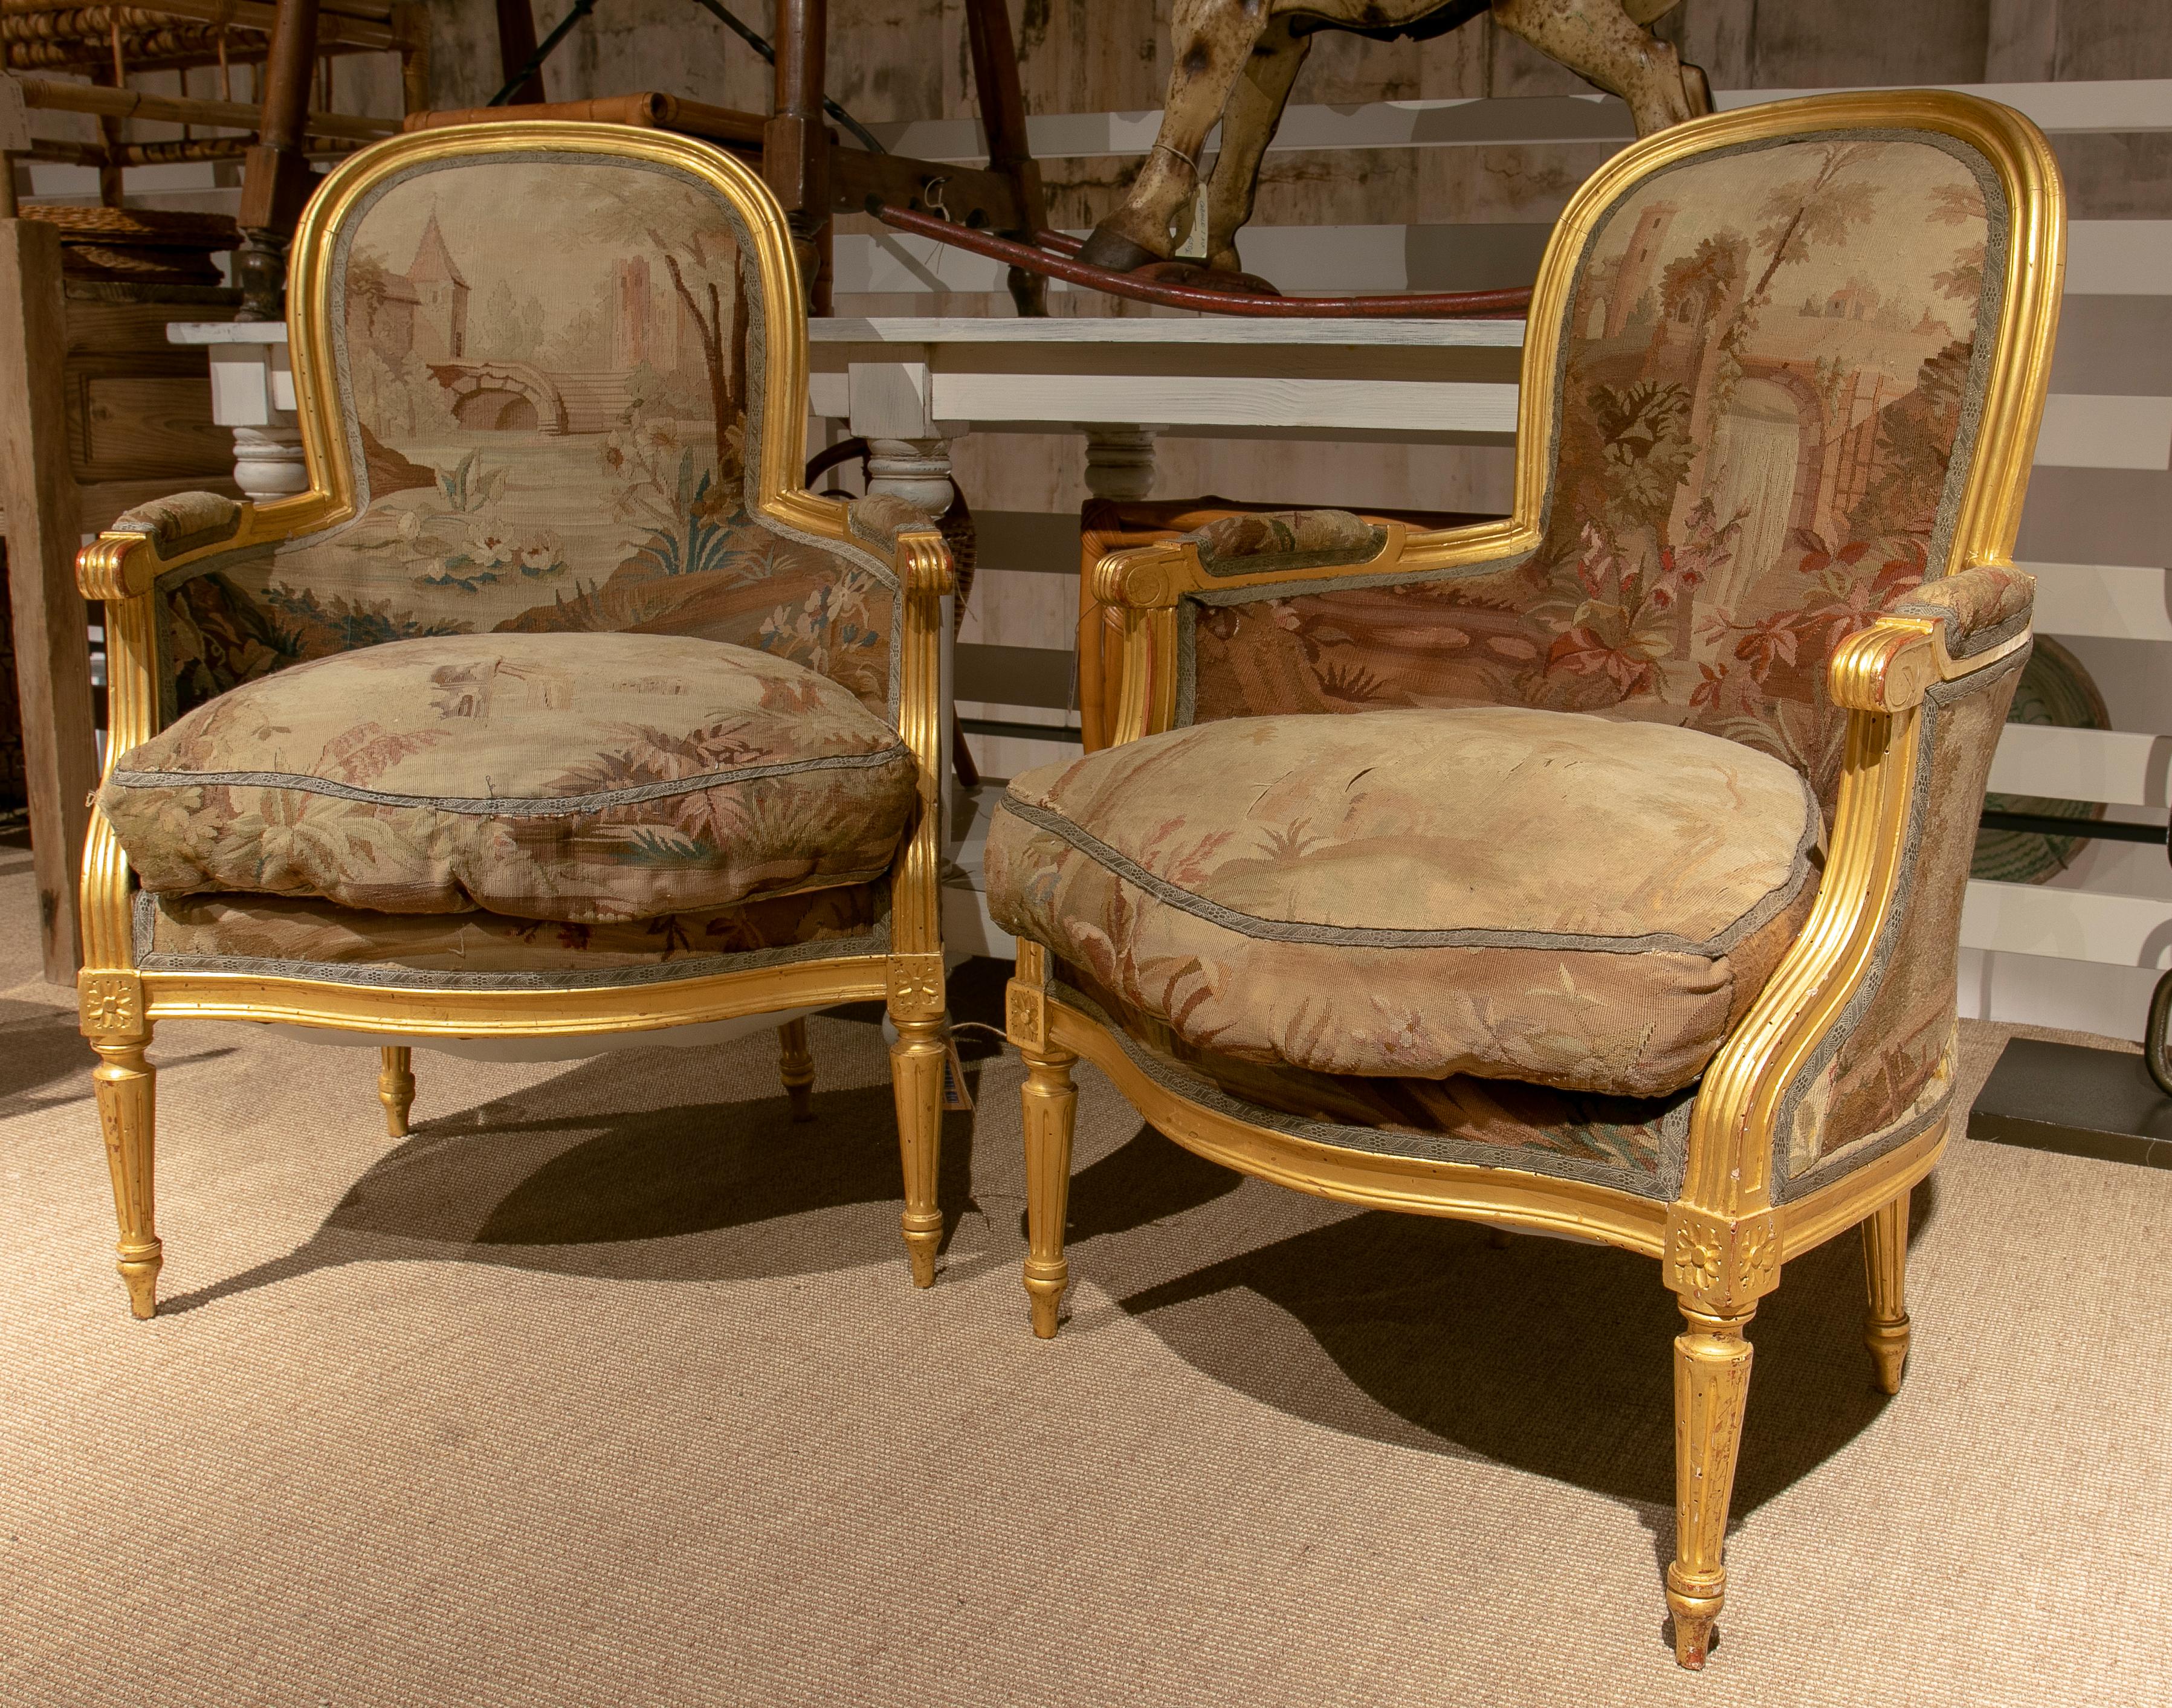 Pair of 1850s French giltwood armchairs w/ 18th century petit point upholstery. 

We think that the upholstery belonged to an earlier pair of armchairs and in the mid 19th century they rebuilt the wooden structure and reused the fabric.